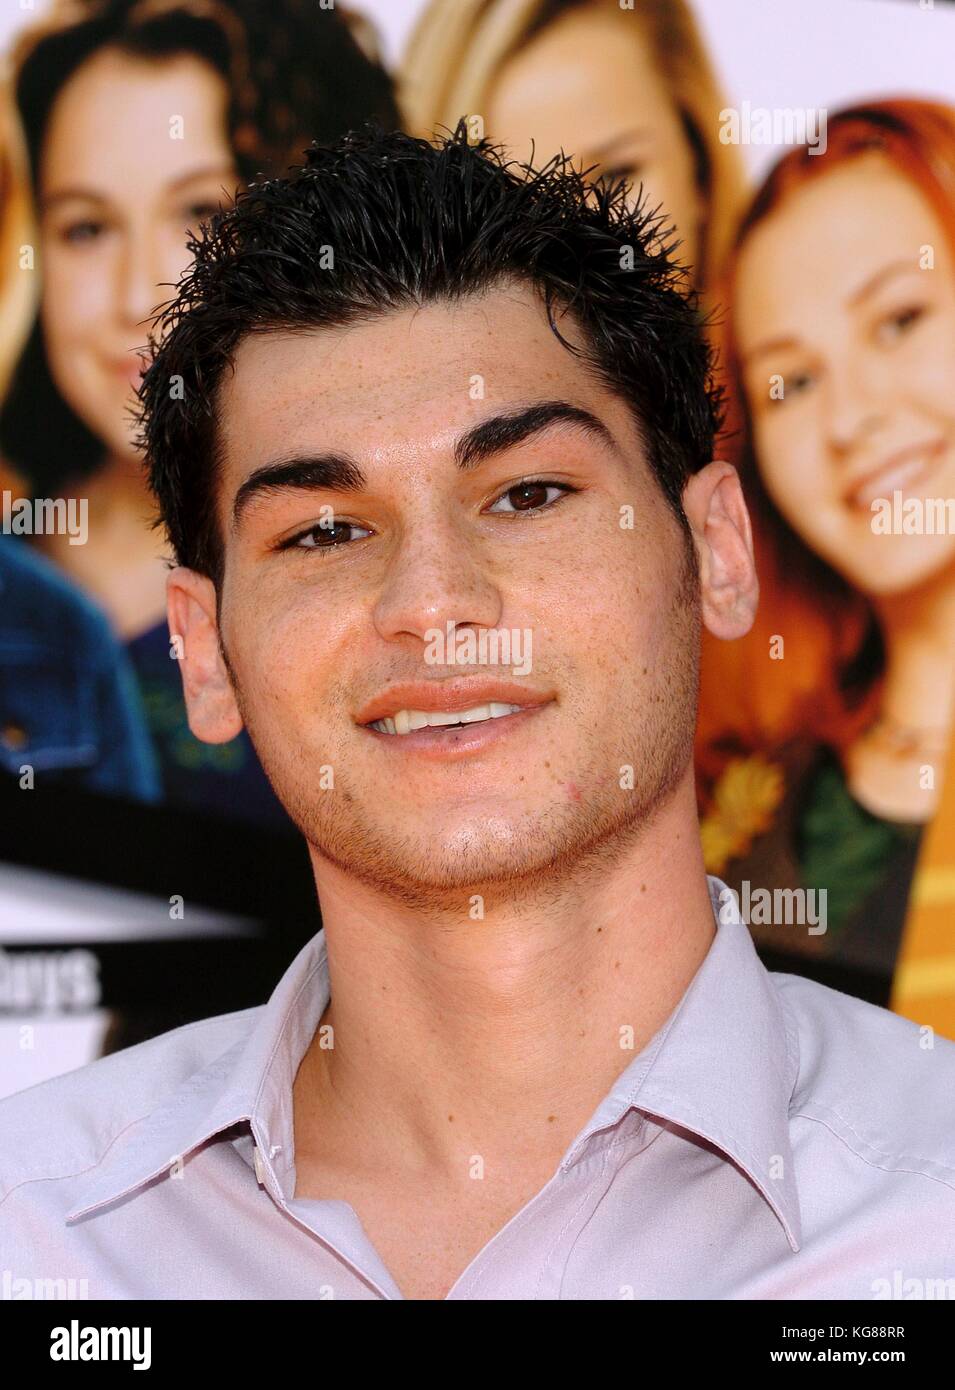 File. 1st Nov, 2017. Actor BRAD BUFANDA, known for playing PCH biker gang member Felix Toombs on UPN's Veronica Mars, died early Wednesday. He was 34. Bufanda died of blunt-trauma injuries suffered after jumping from a building and his death has been ruled a suicide, according to Assistant Chief Ed Winter of the Los Angeles County coroner's office. Bufanda left a note behind, Winter said. Pictured: June 27, 2004 - Hollywood, California, Usa - Brad Bufanda Sleepover Premeire At The Arclight Cinerama.Dome Hollywood. Credit: Globe Photos/ZUMAPRESS.com/Alamy Live News Stock Photo